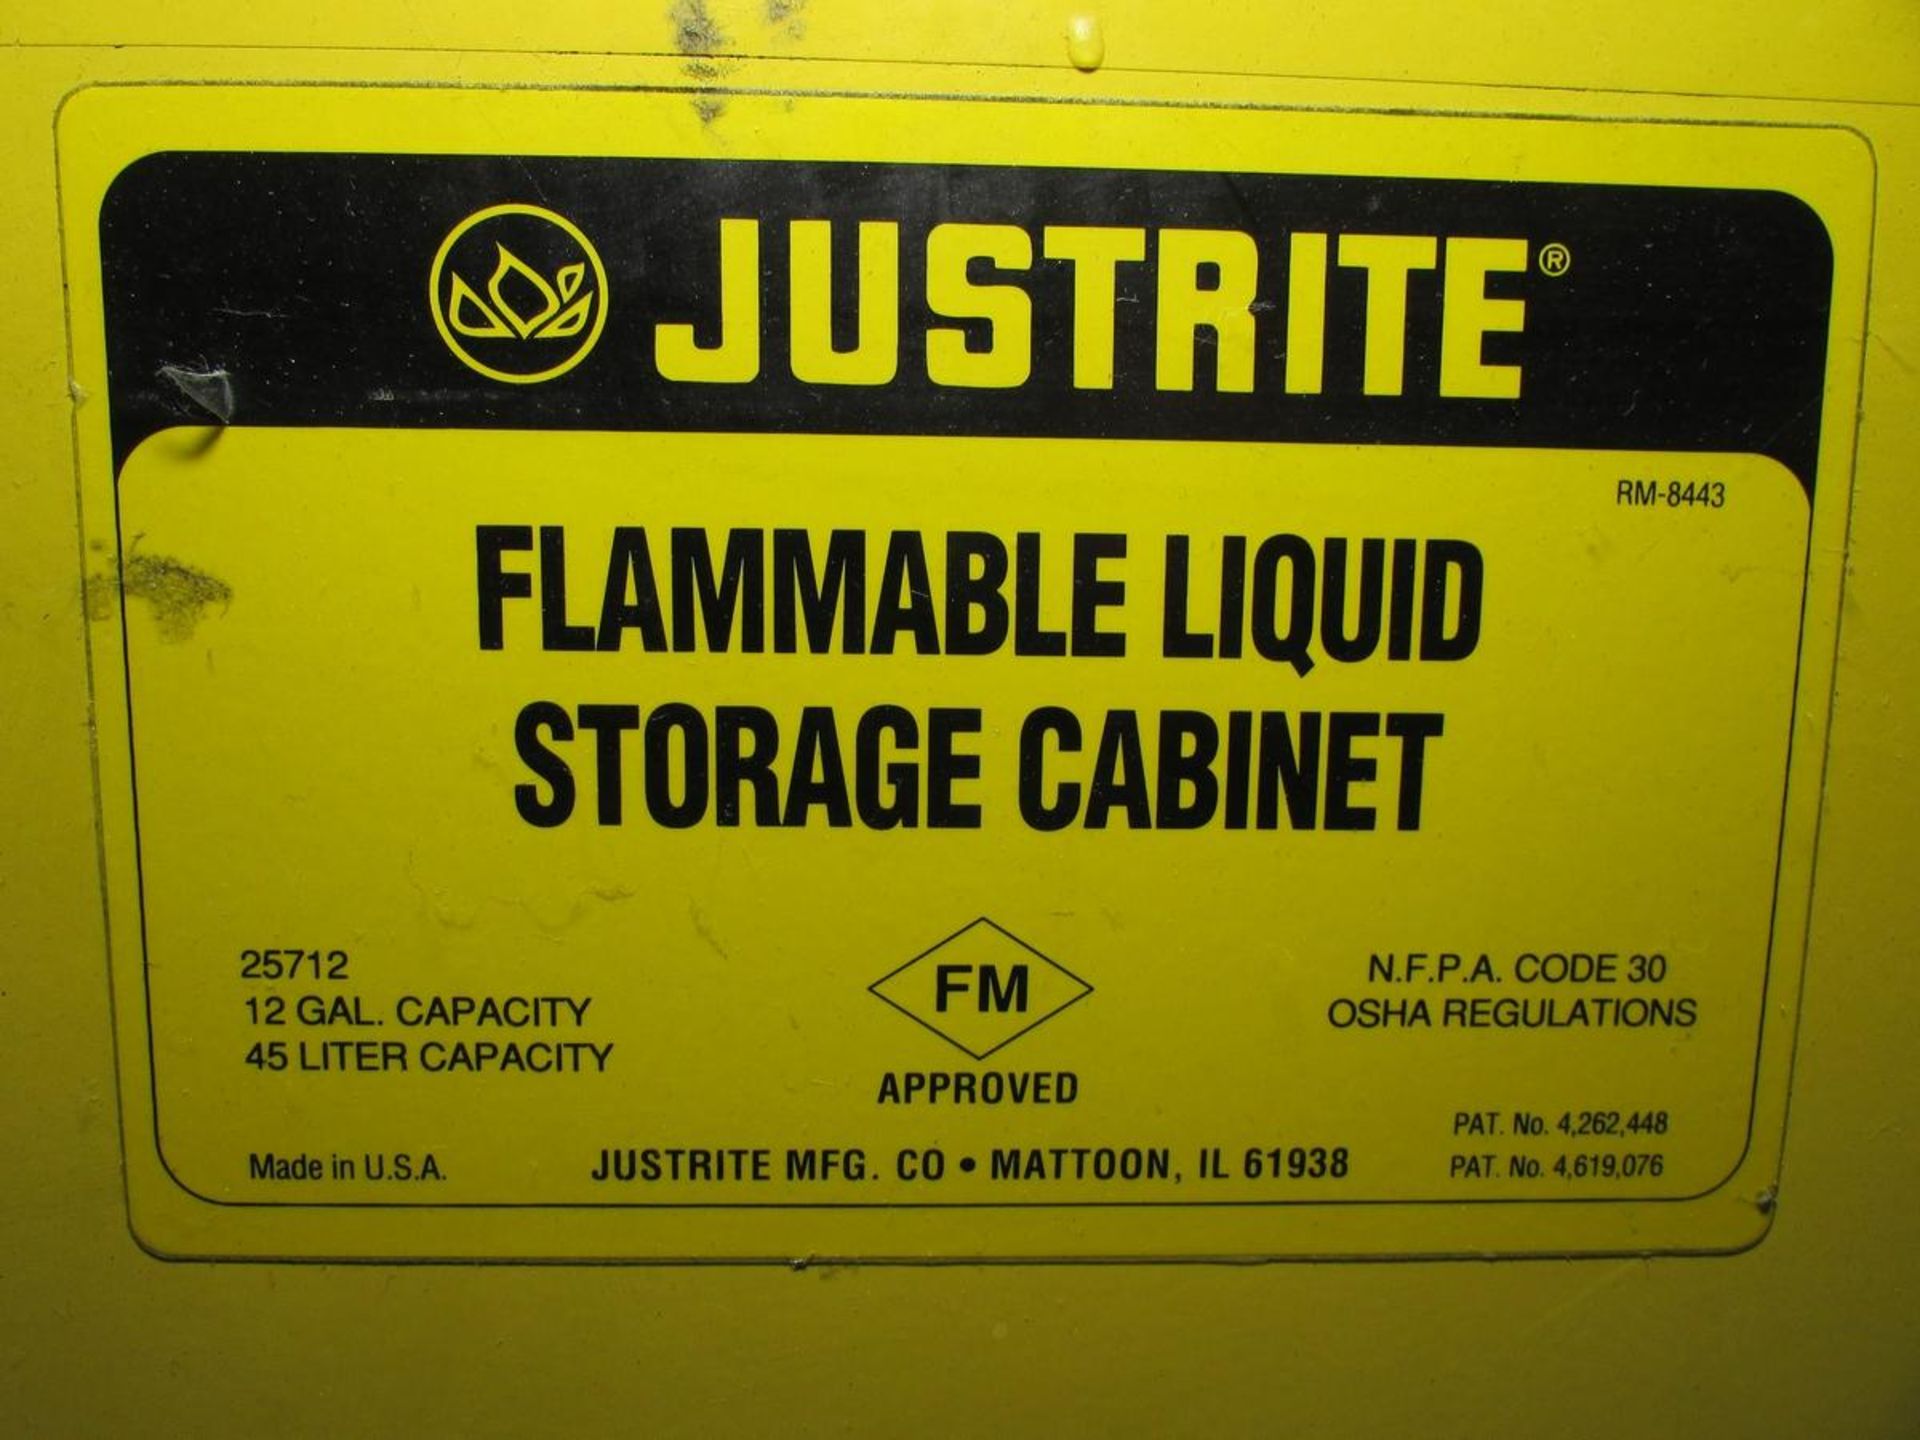 Justrite 12 Gal. Flammable Liquid Storage Cabinet - Image 4 of 4